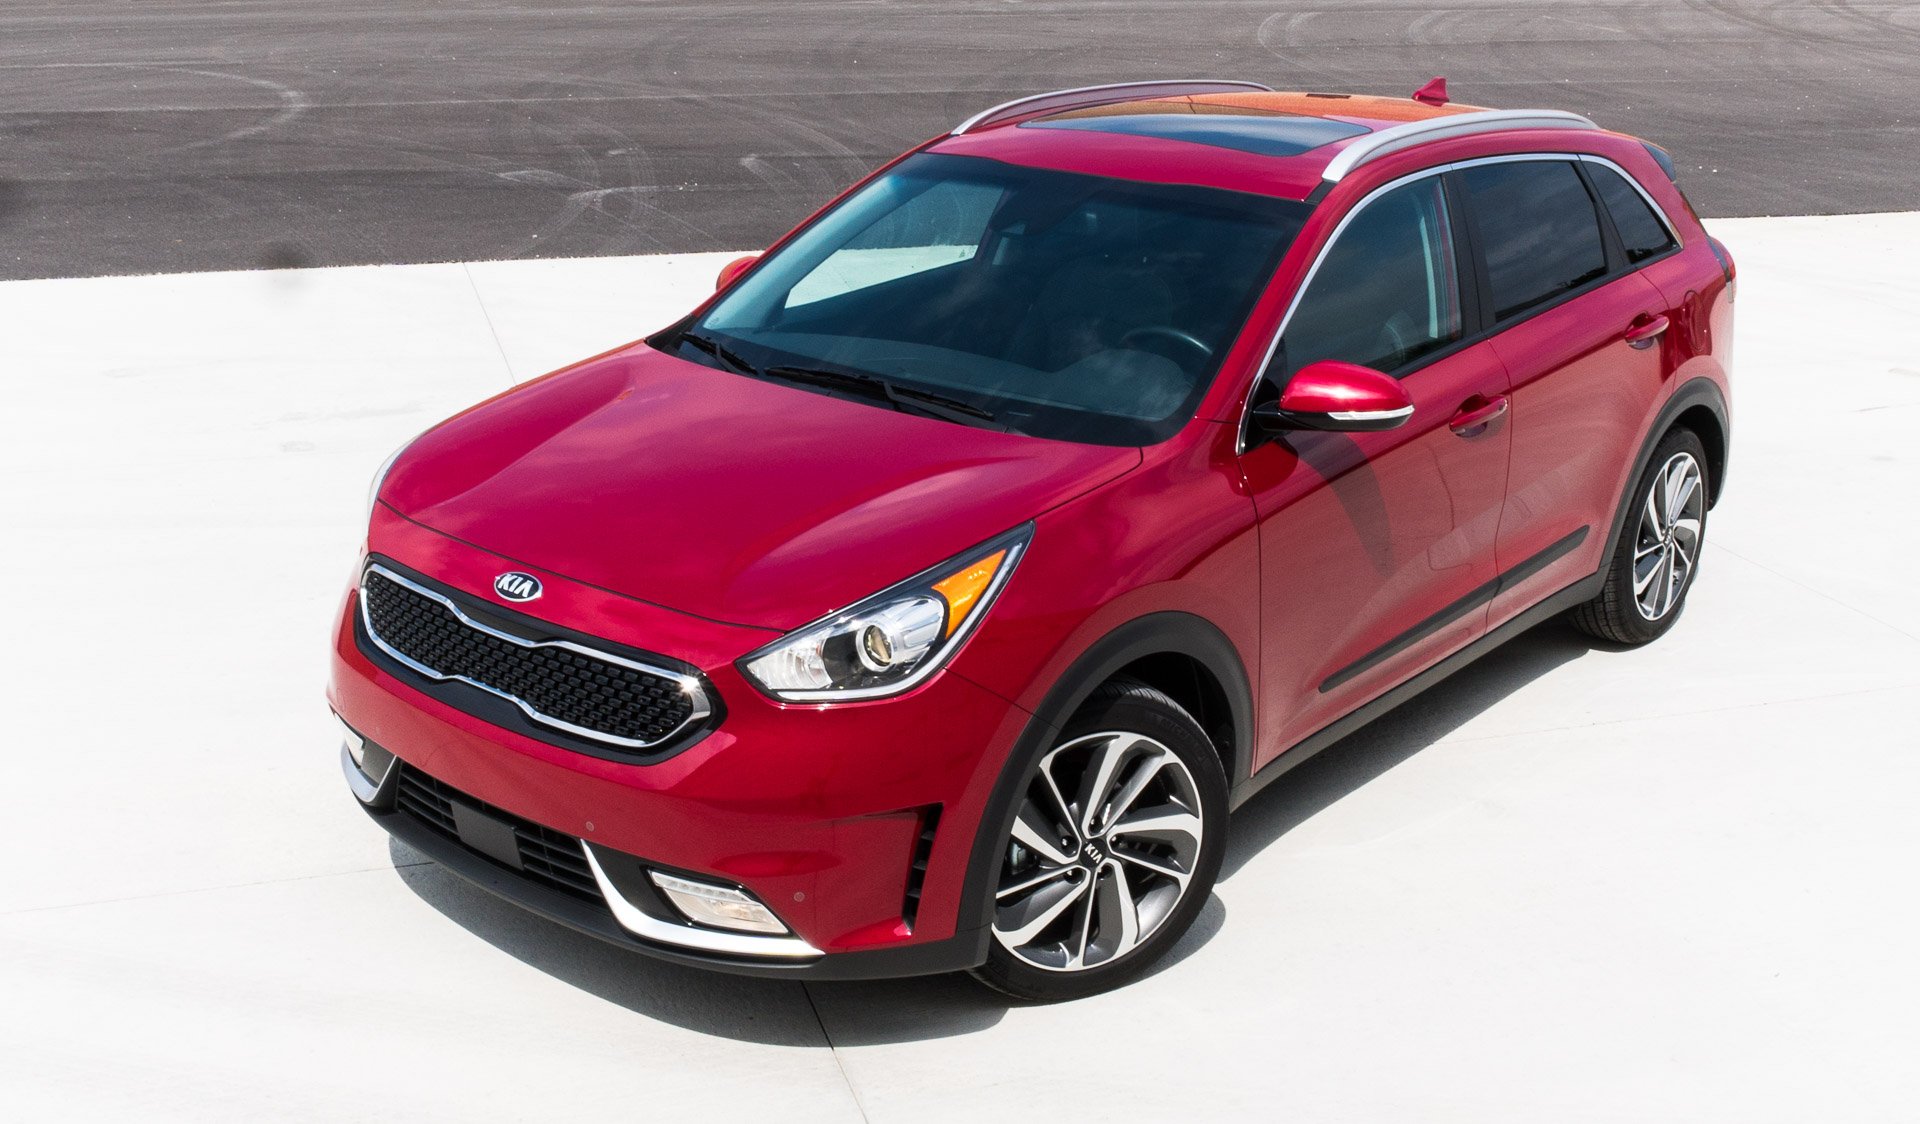 2017 Kia Niro Touring Review: A Wagon By Any Other Name…